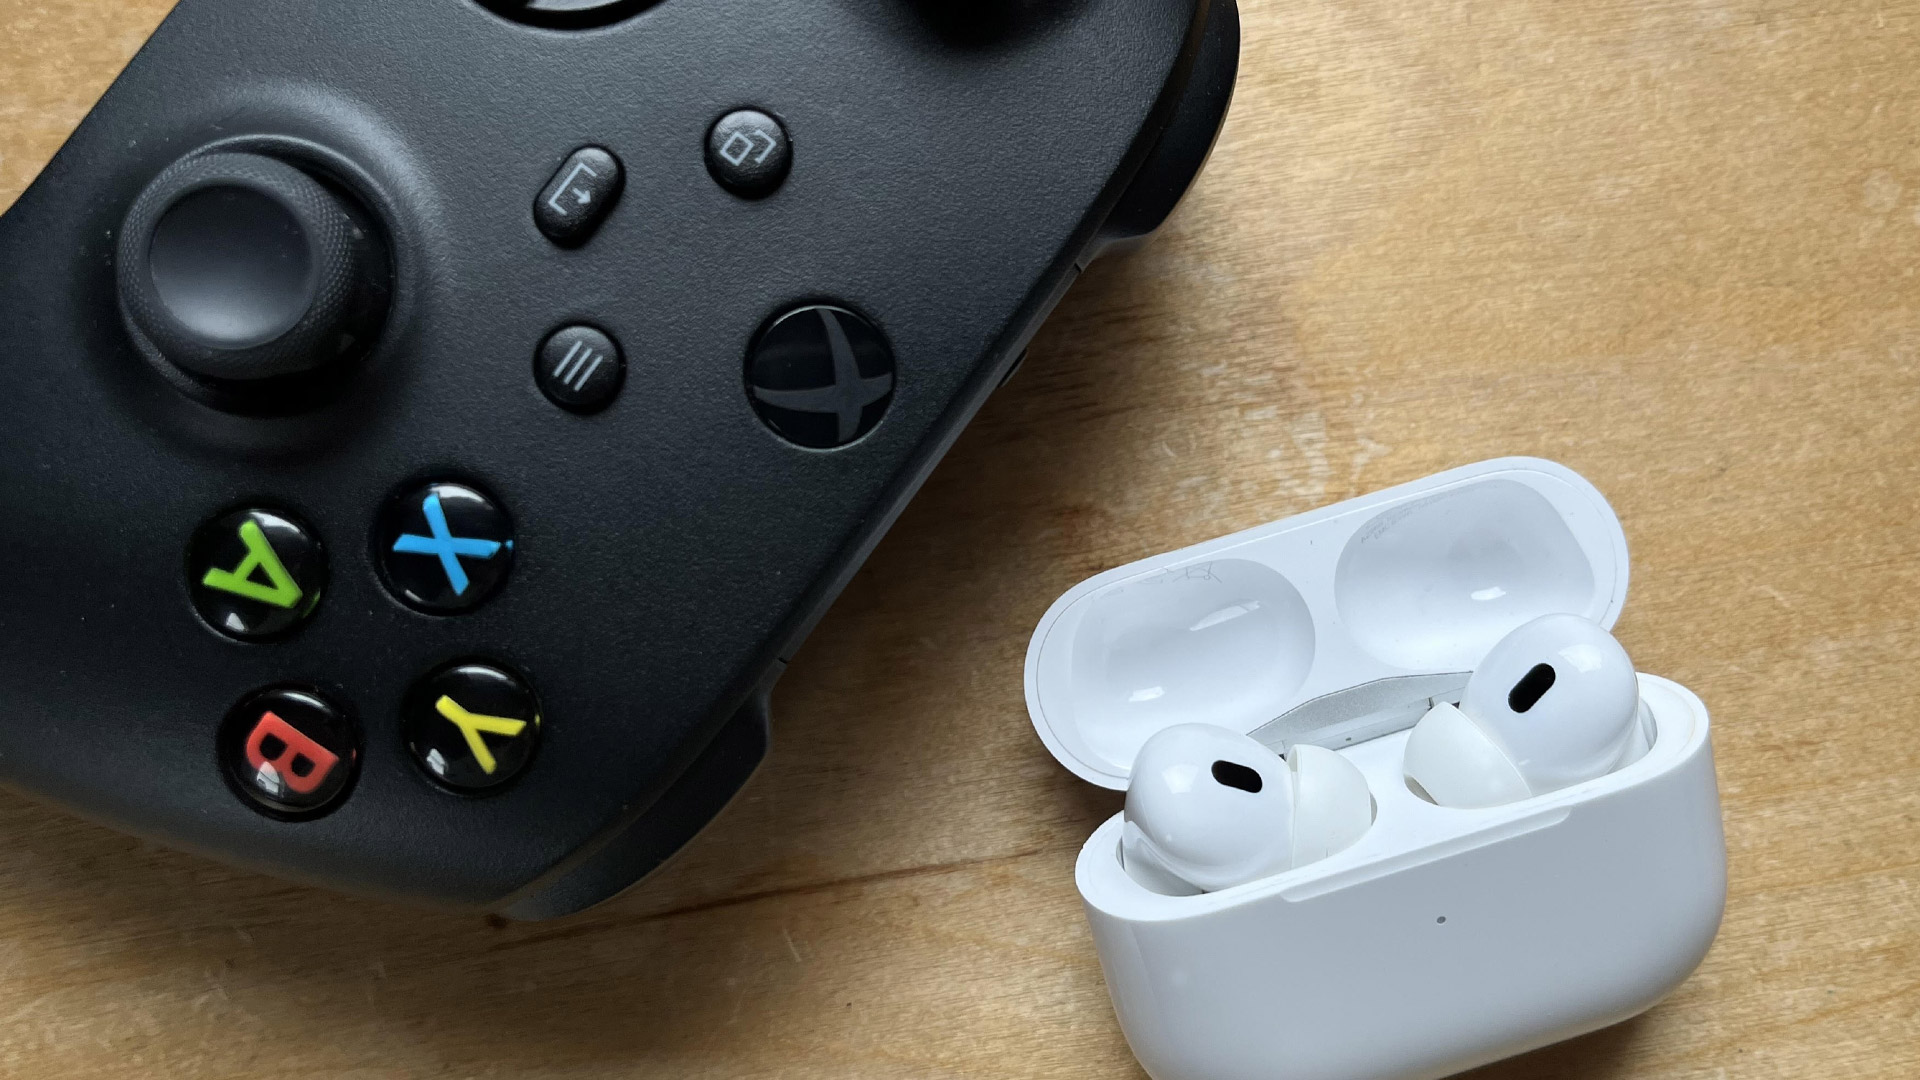 An Xbox controller next to a pair of AirPods